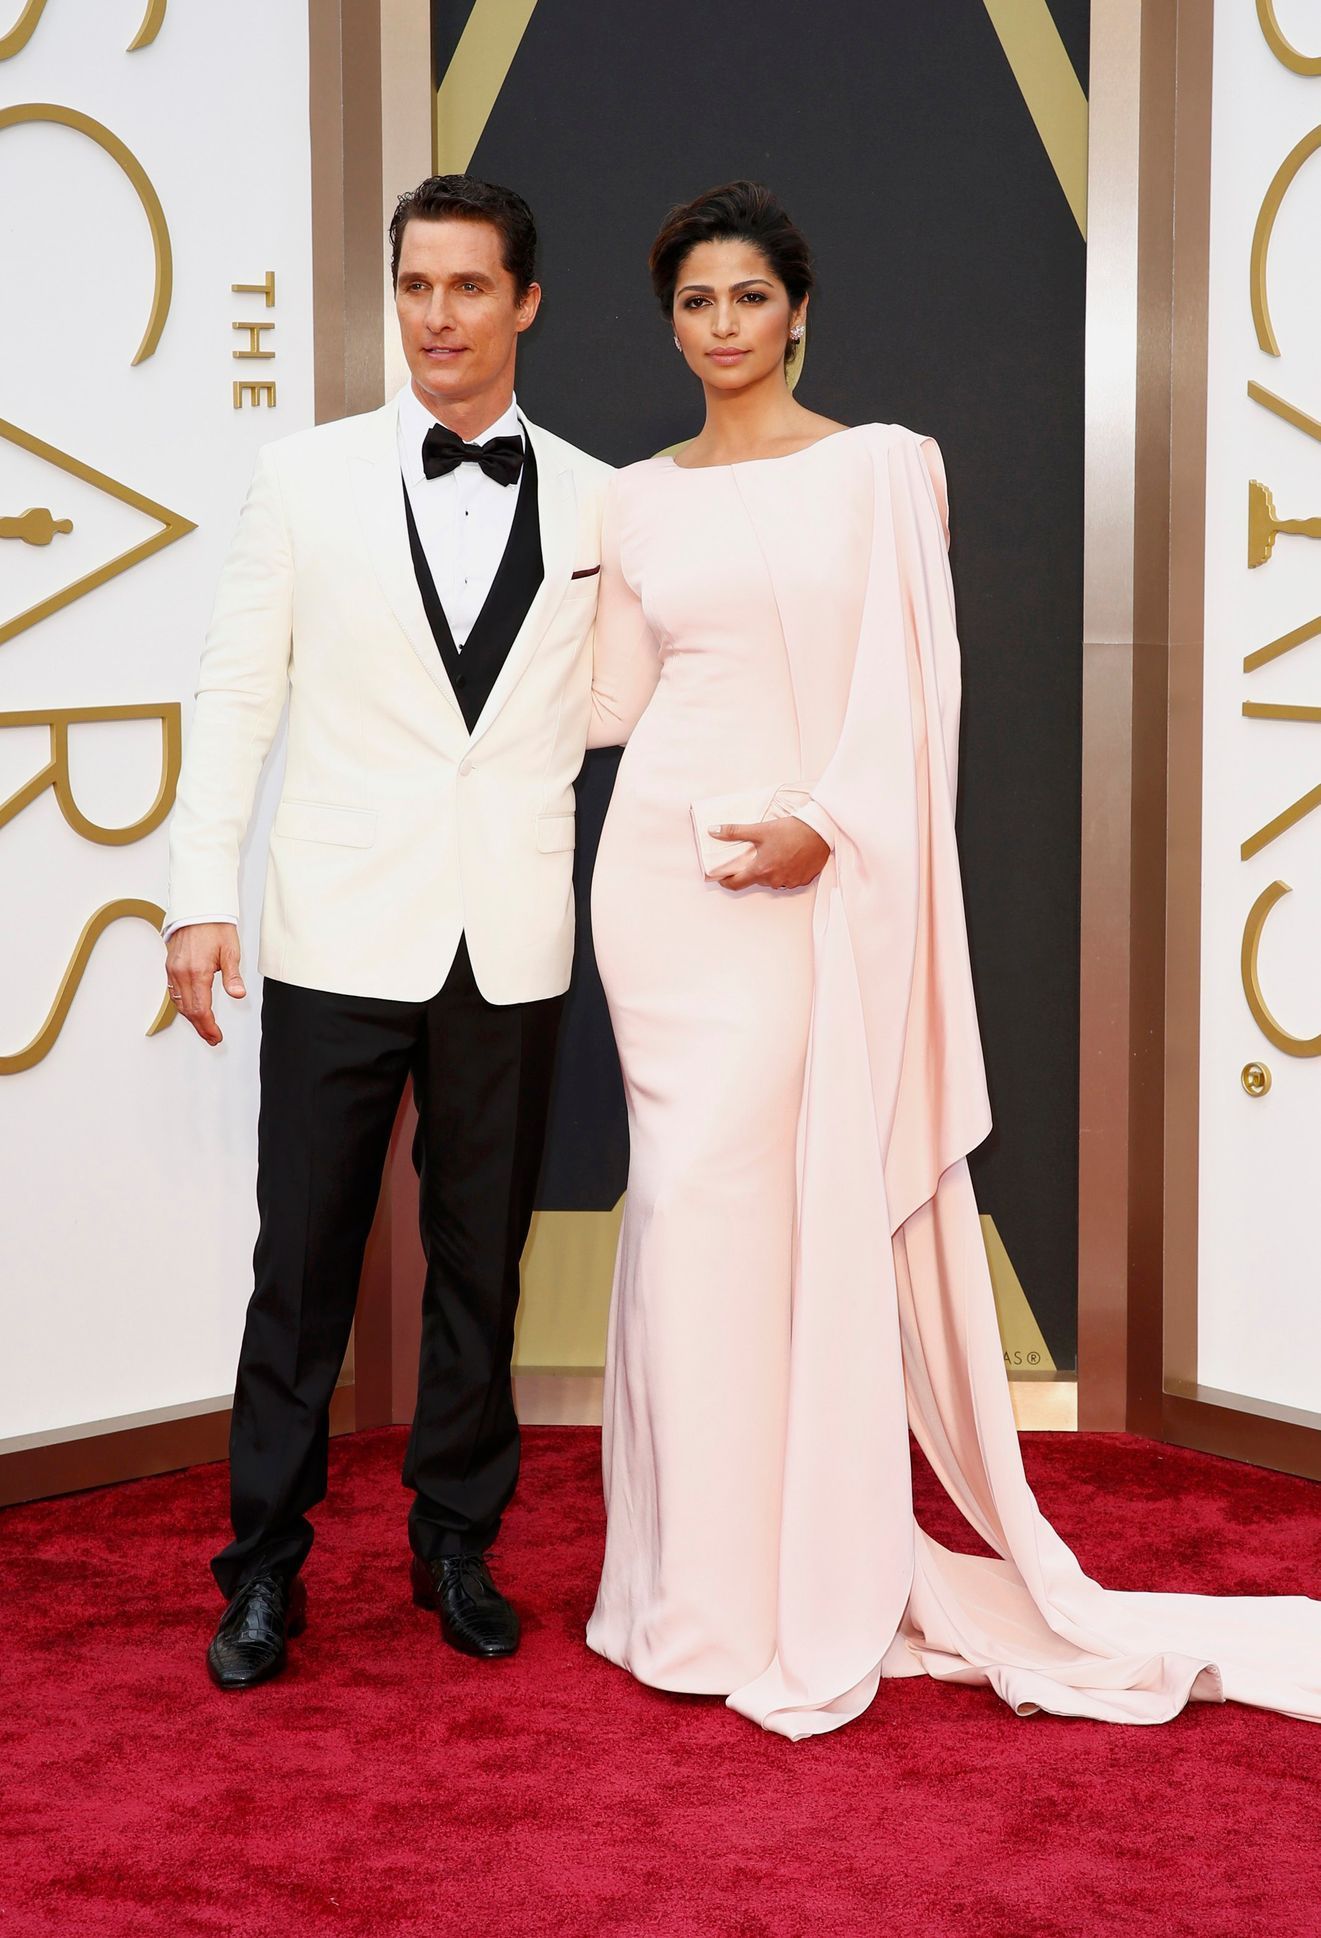 Actor McConaughey and his wife Camila arrive at the 86th Academy Awards in Hollywood